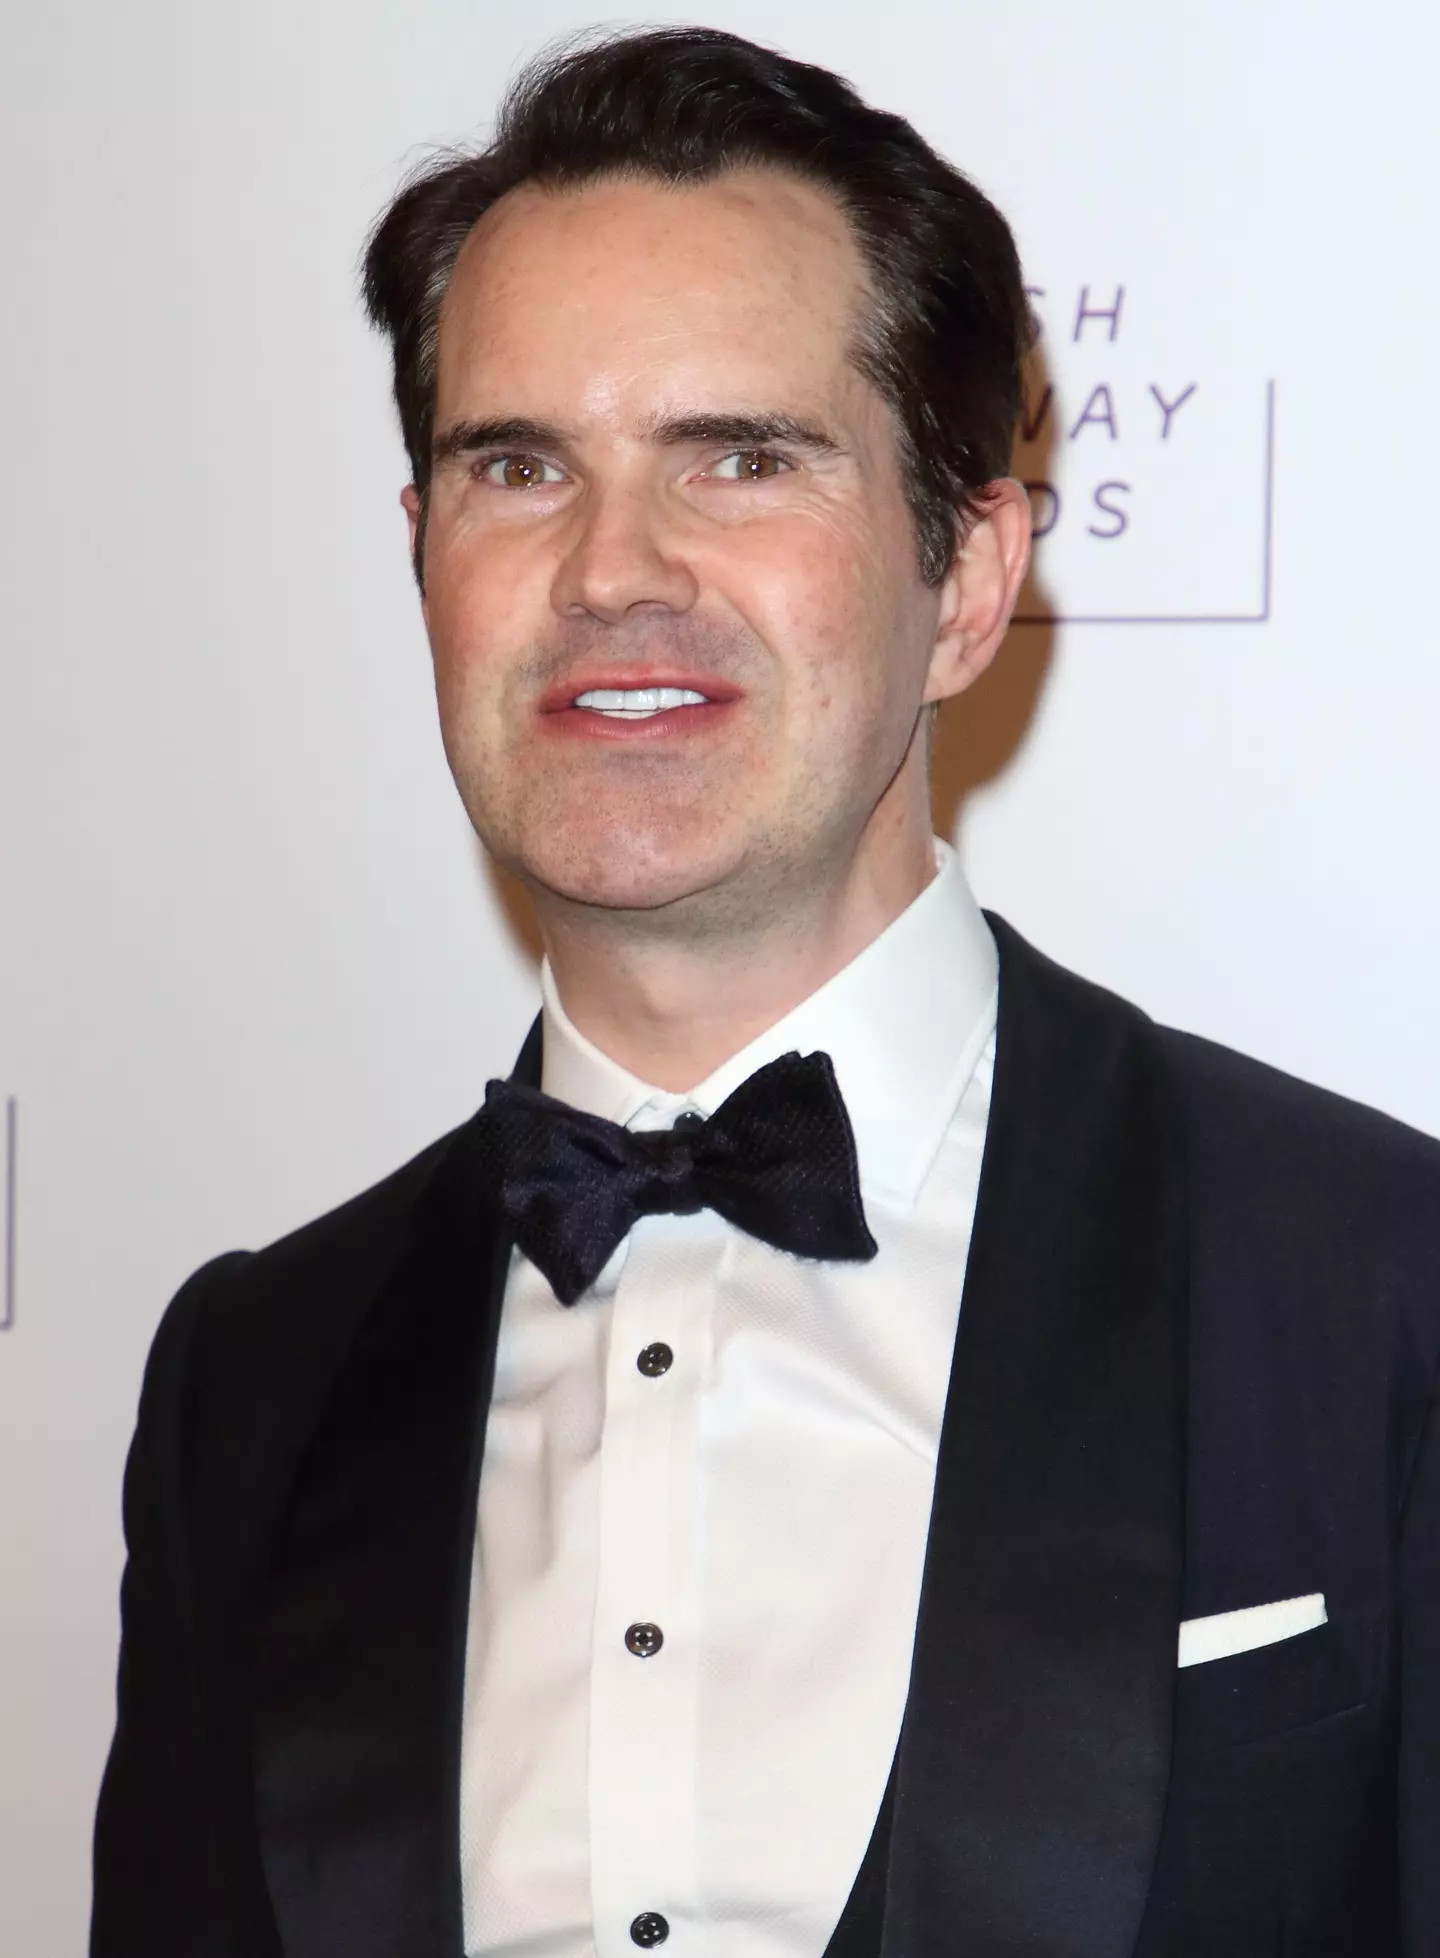 Jimmy Carr has been criticised over comments he made about sex abuse.